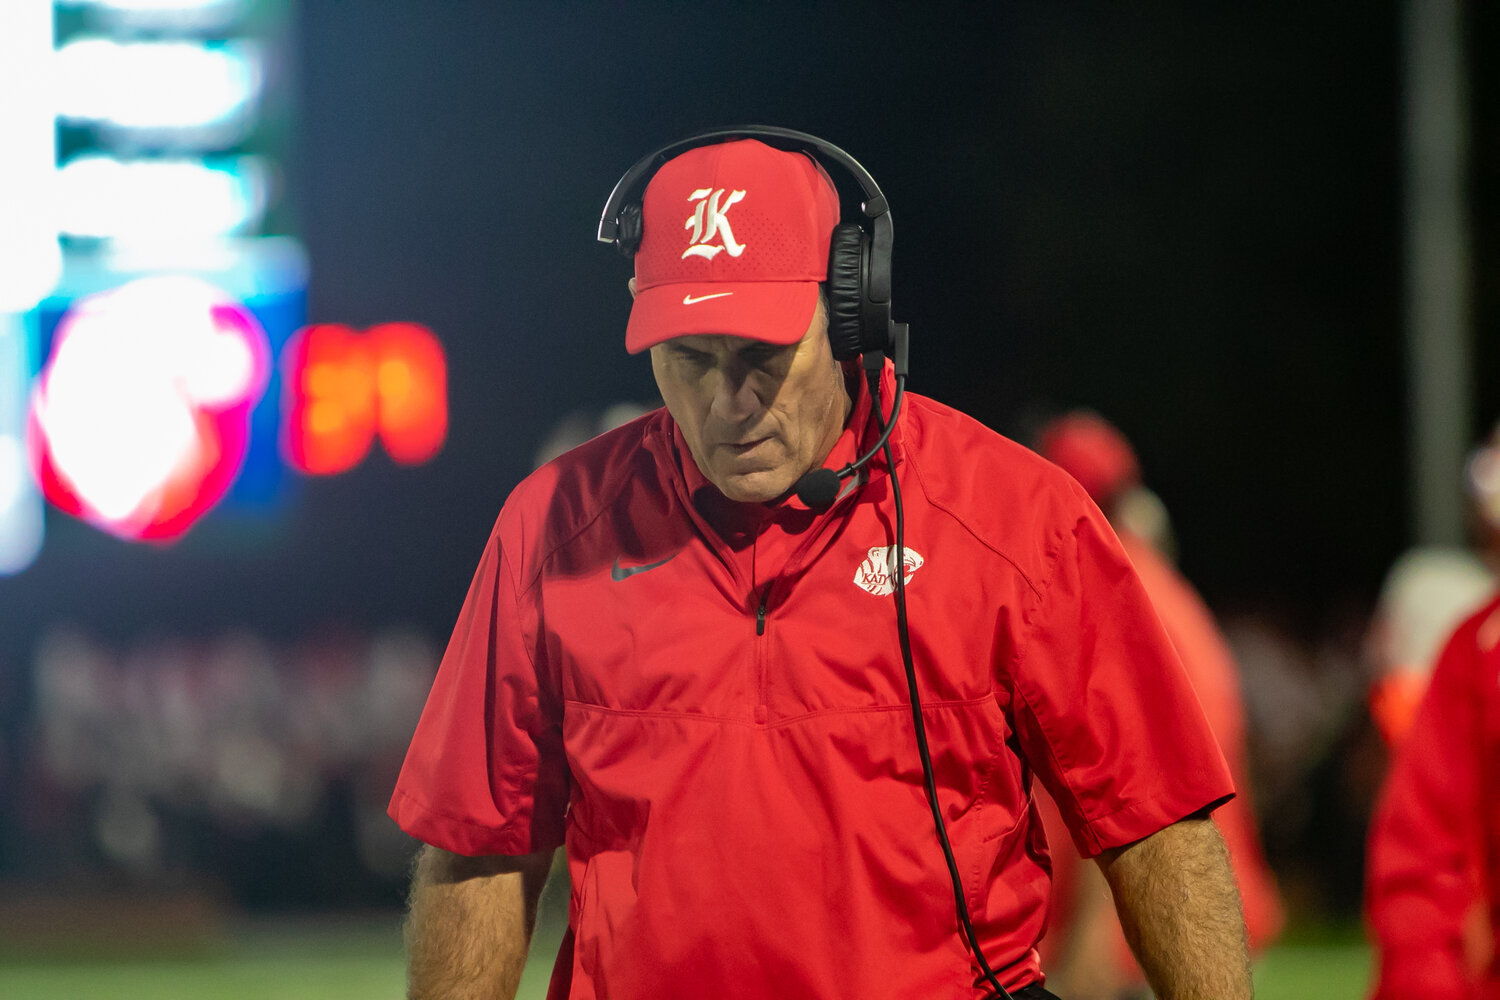 Gary Joseph walks the sideline during Friday's area round game between Katy and Cy-Fair at the Berry Center in Cypress.